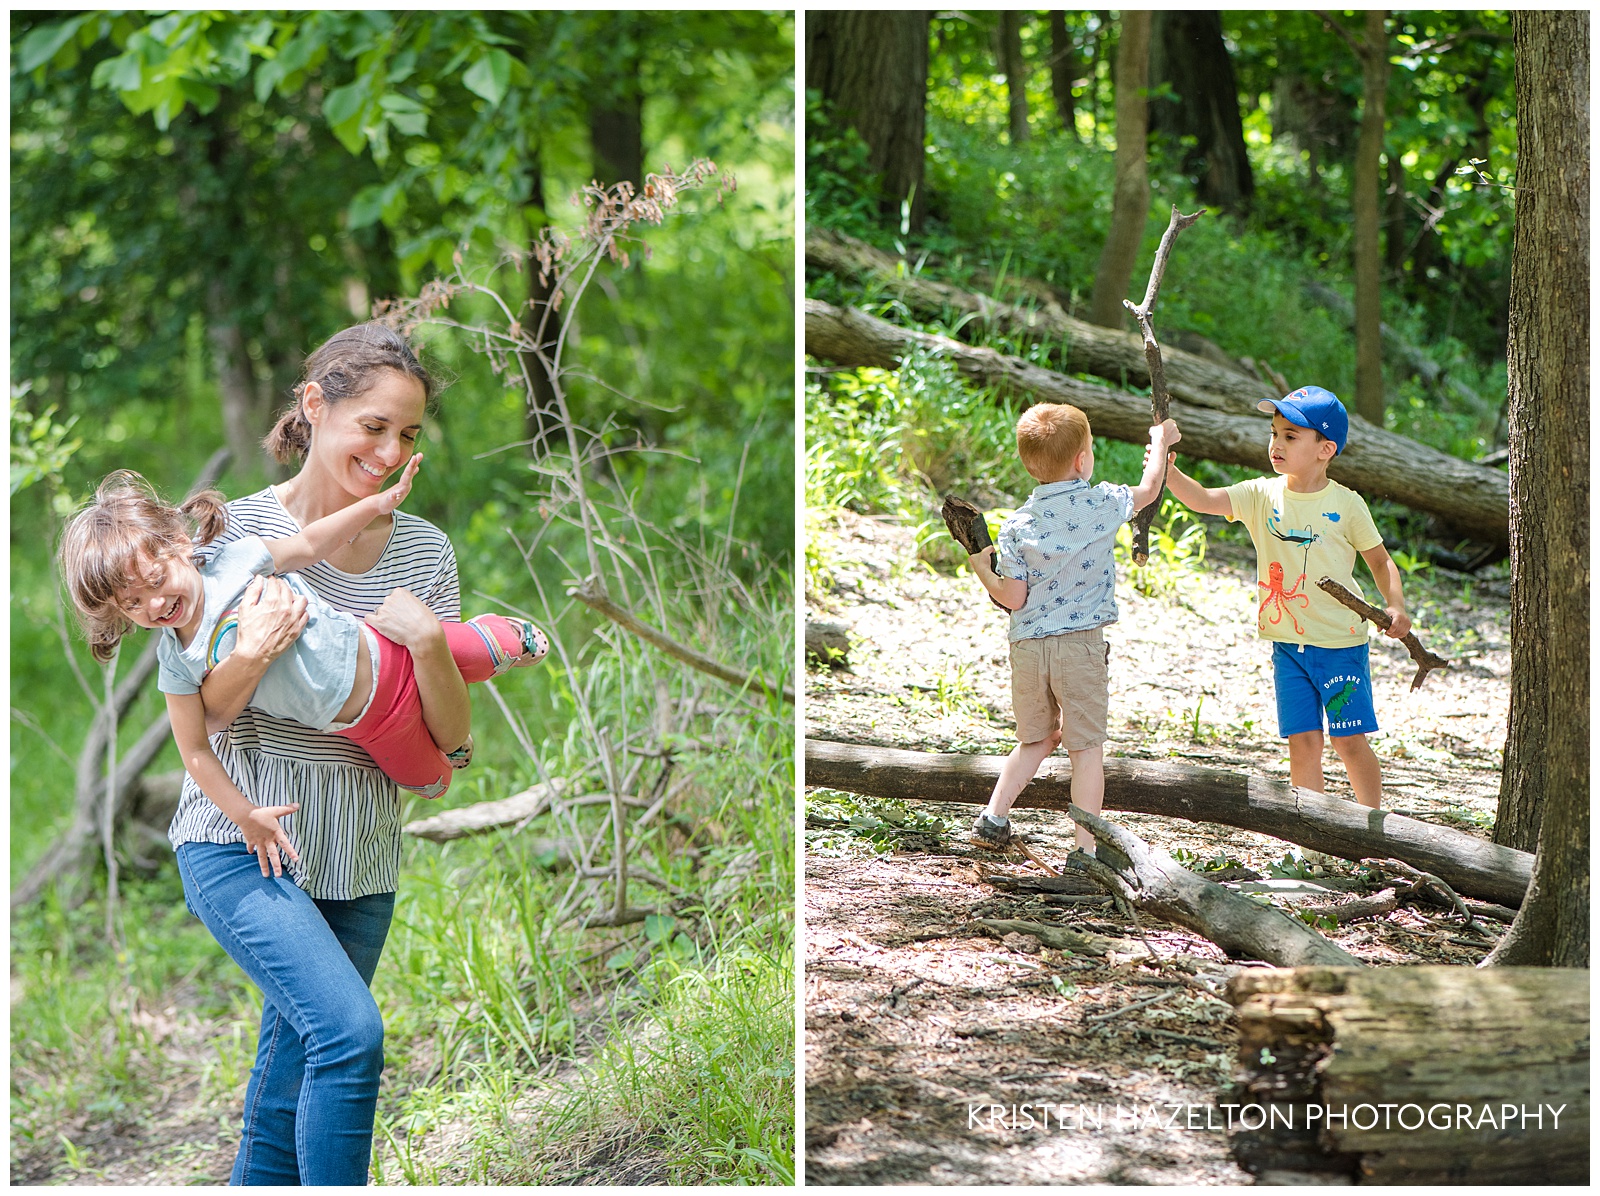 Collage of a woman carrying her toddler daughter and two young boys playing with sticks at Thatcher Woods in River Forest, IL